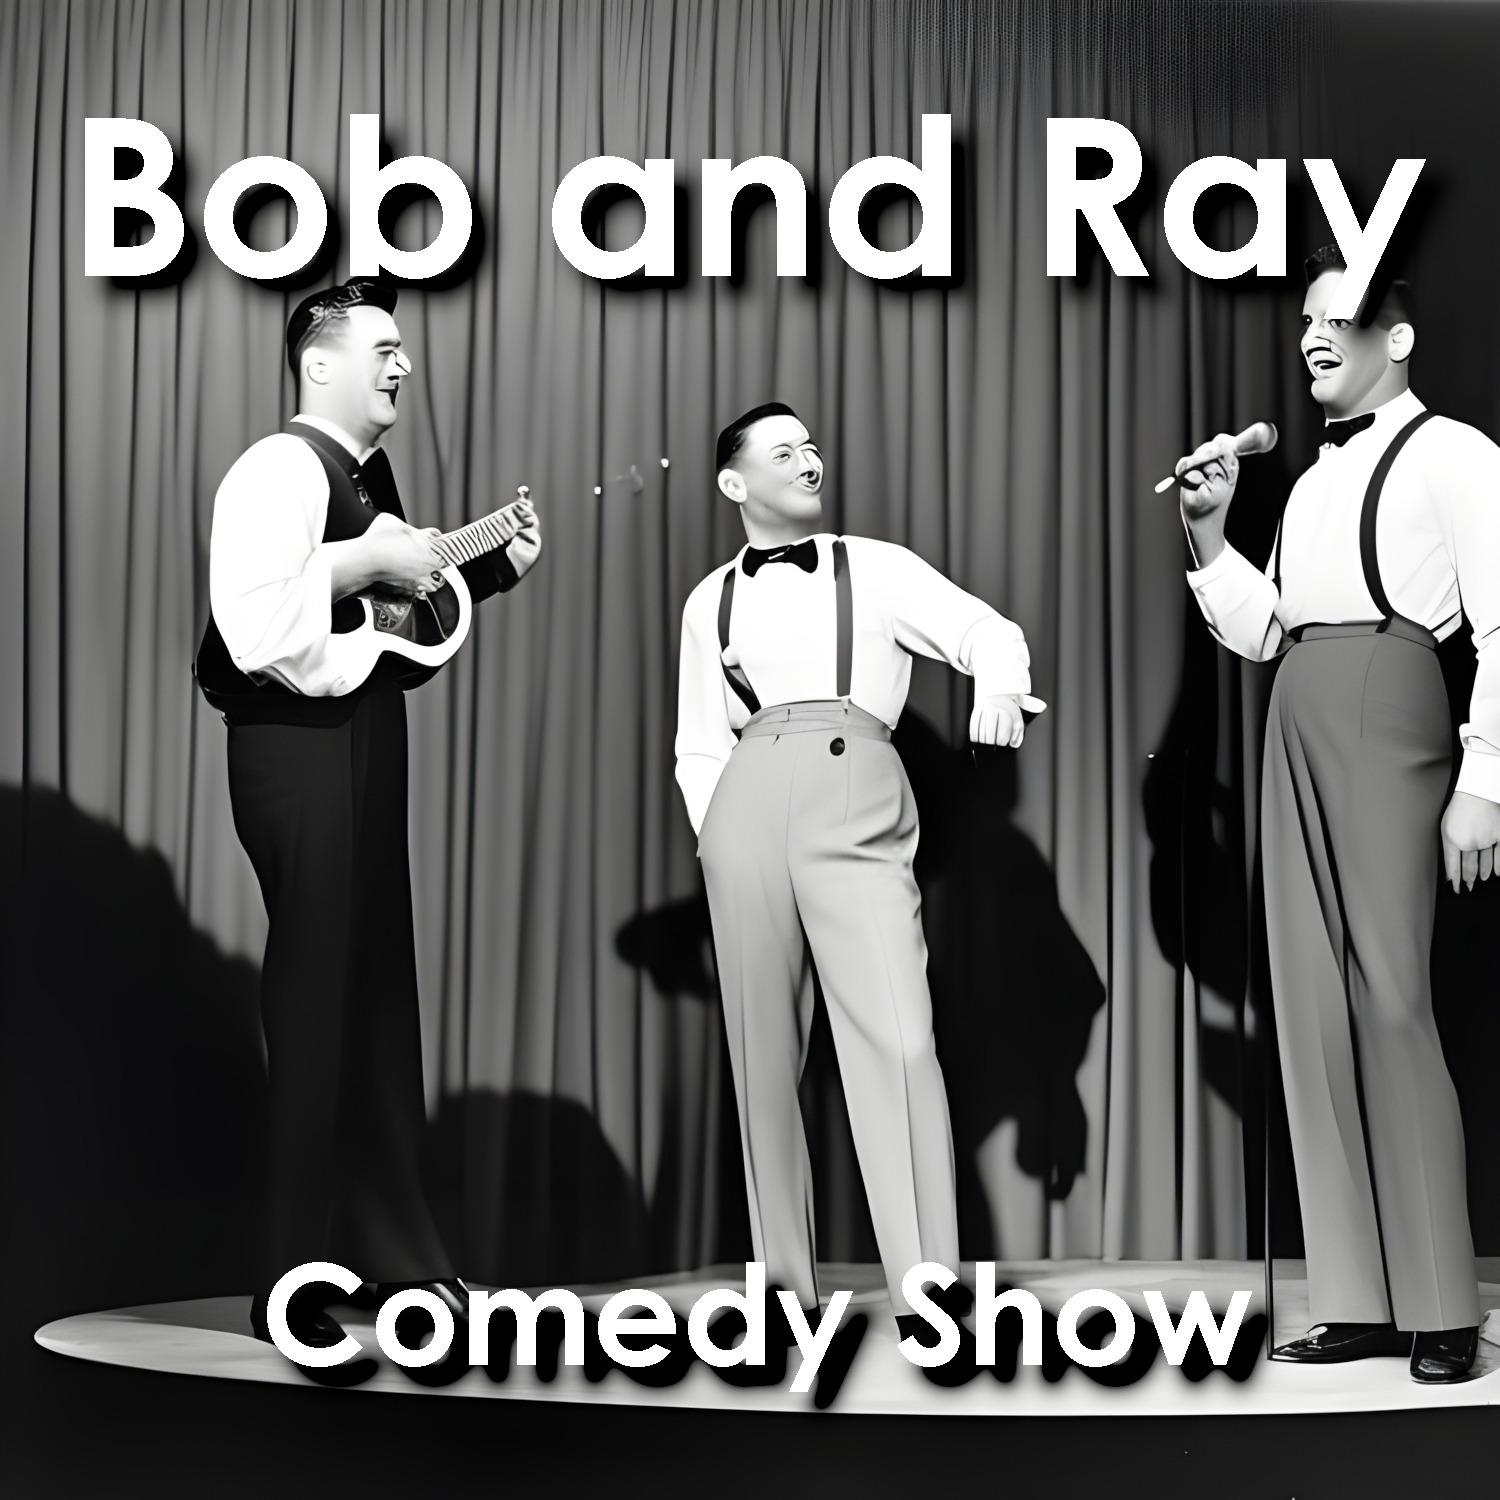 Bob and Ray: Old Time Comedy Program